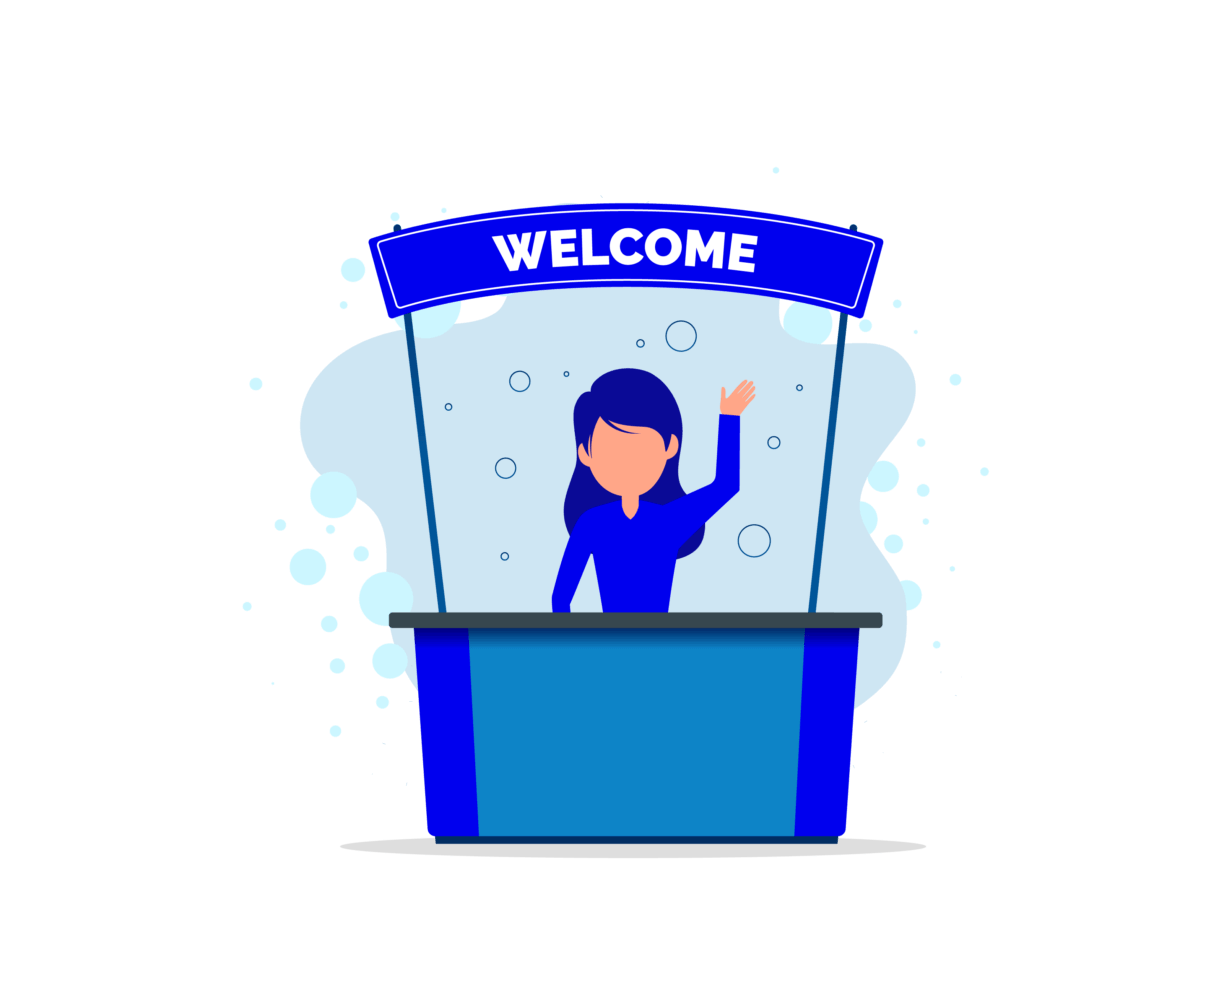 Digital image of blue stand with a person waving. Sign says Welcome.